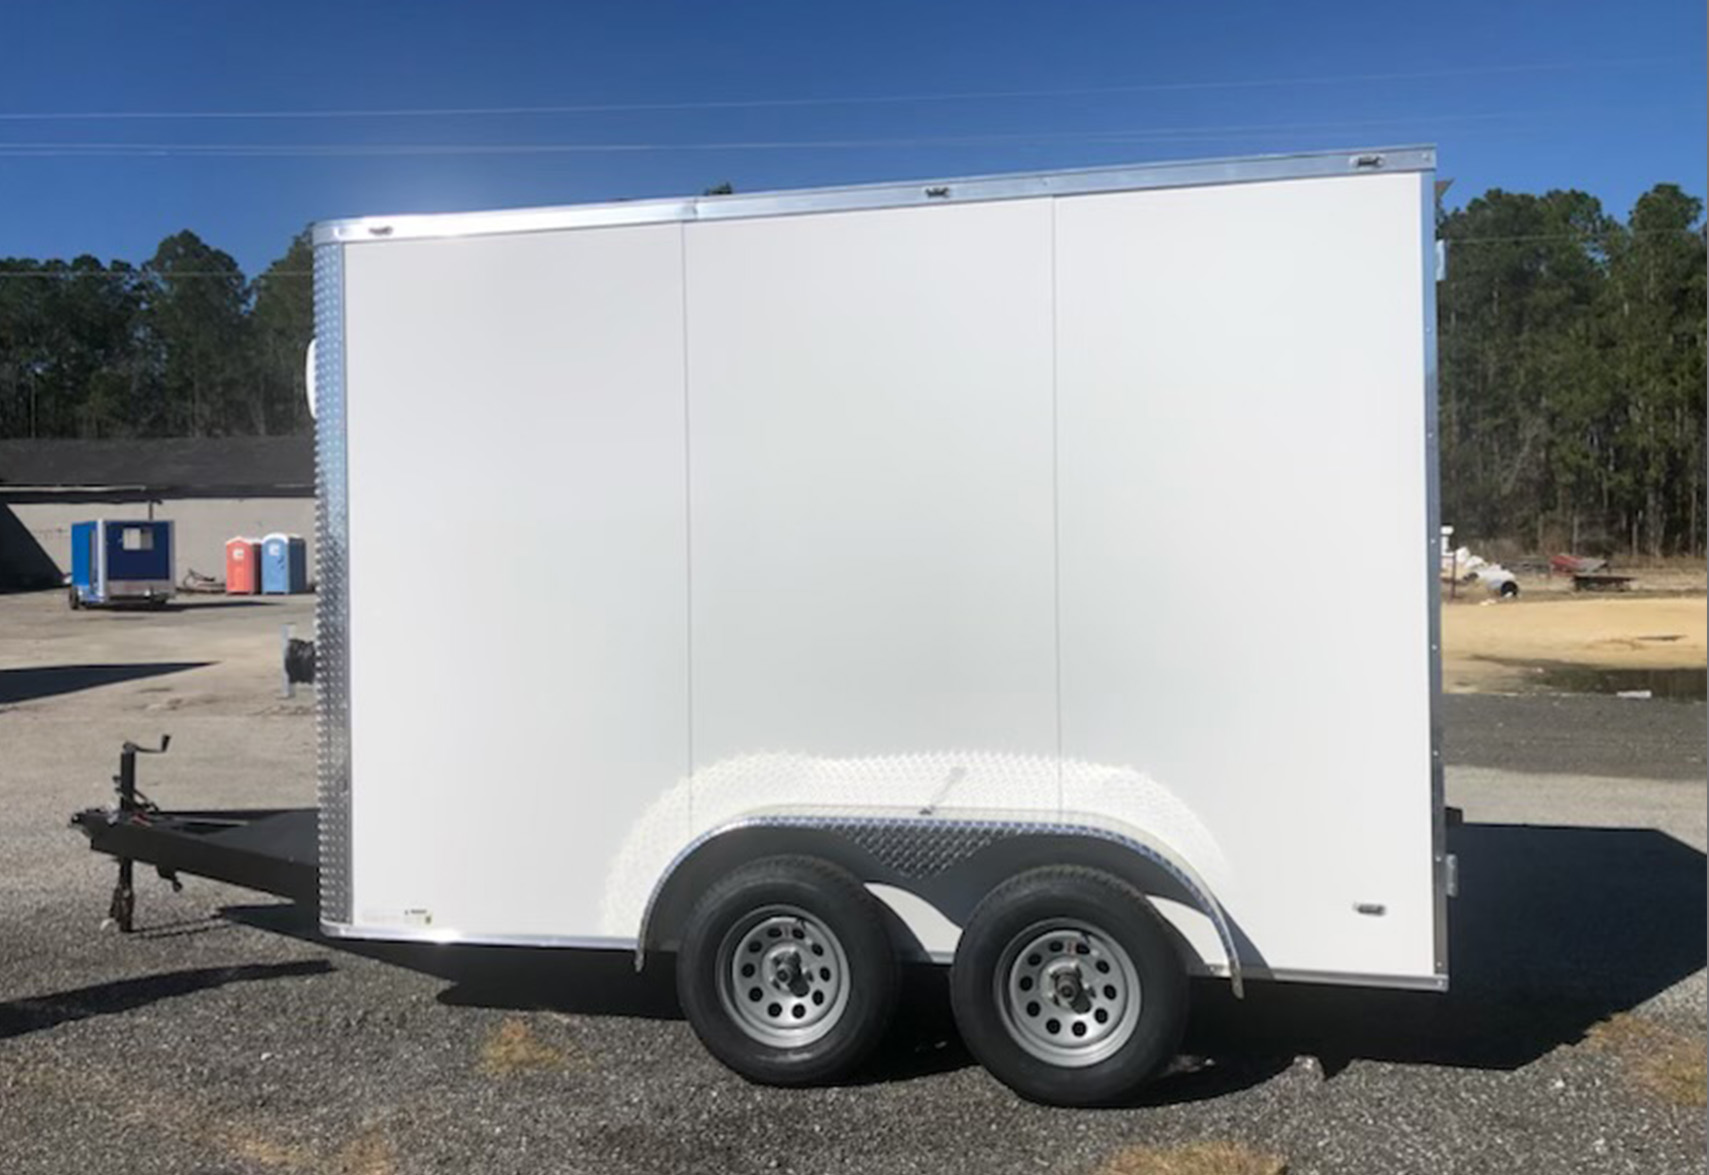 A white enclosed trailer is parked on a gravel surface.